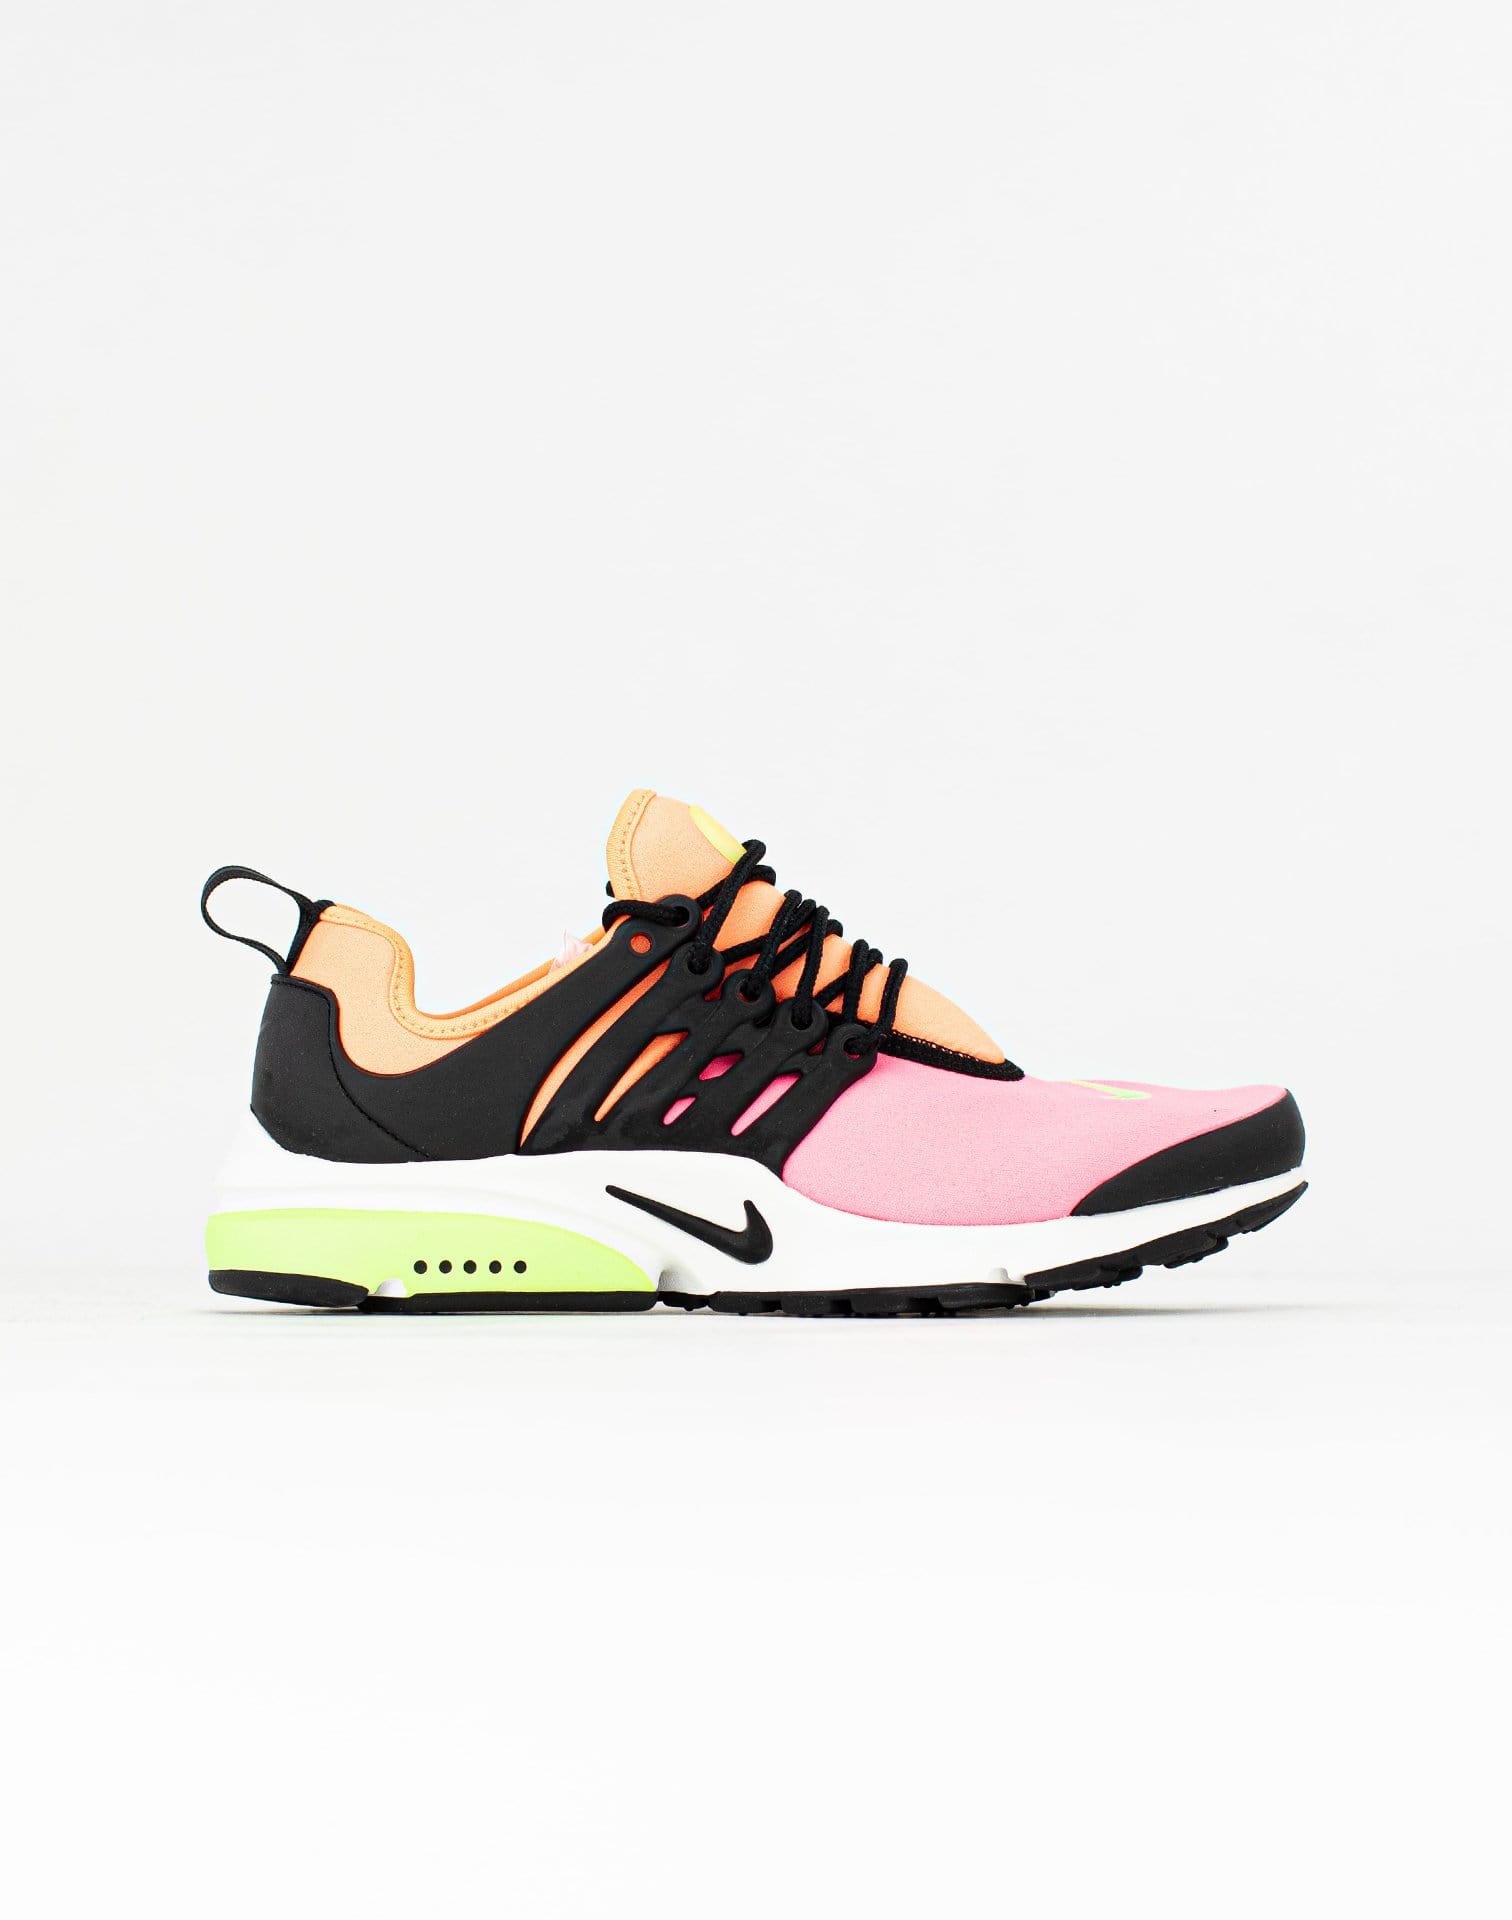 nike presto that customers could put their name and color